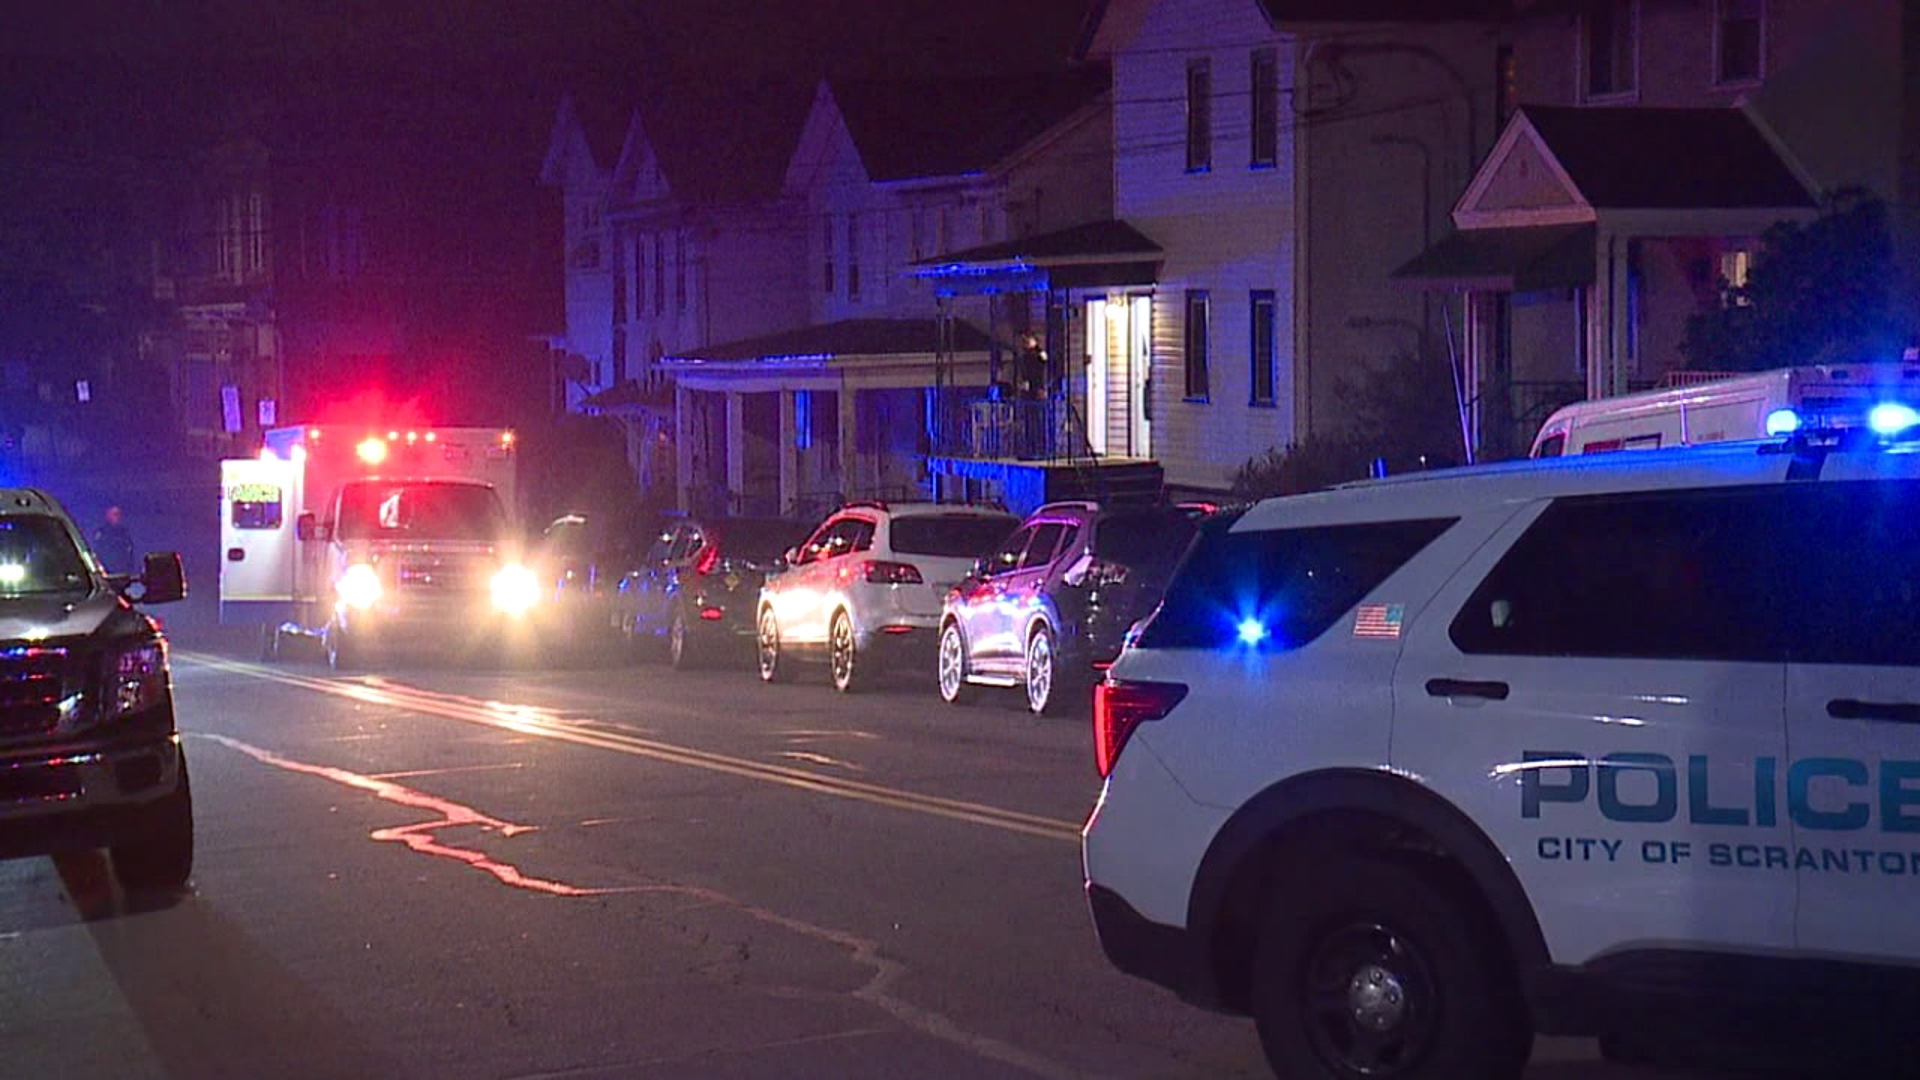 Police responded to a home along the 1700 block of Pittston Avenue in the city for reports of shots fired around 3 a.m. Monday.